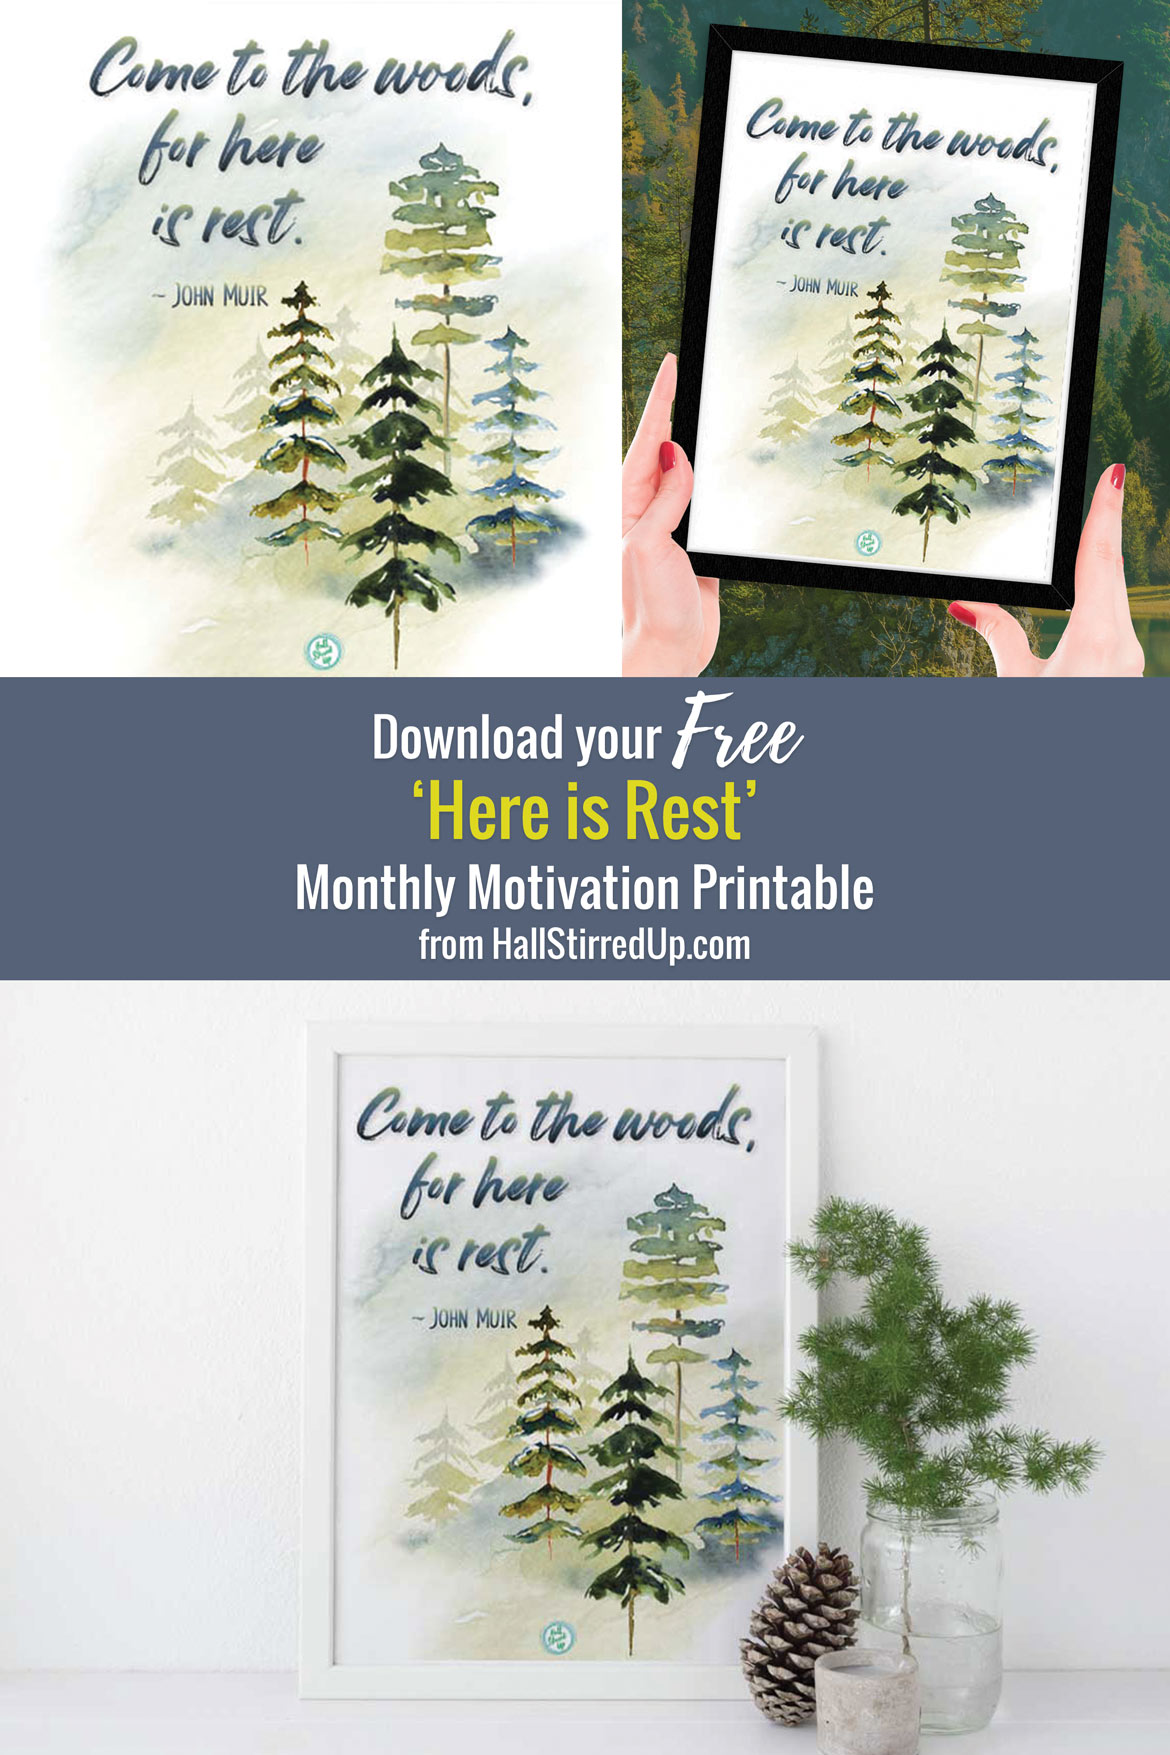 Rest and de-stress - Monthly Motivation includes printable